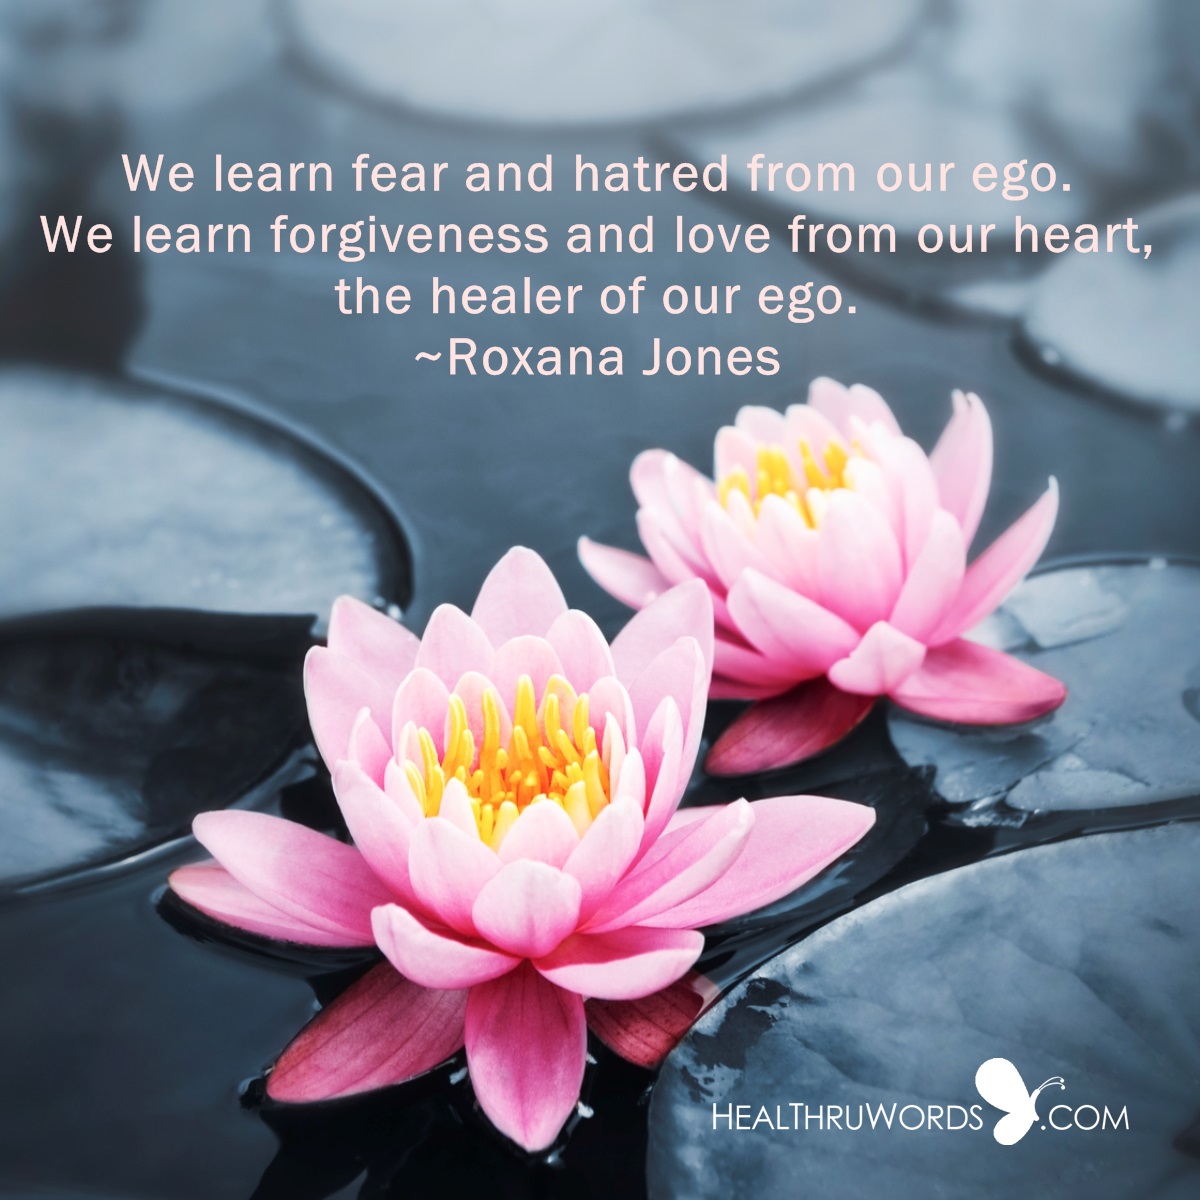 We learn fear and hatred from out ego. We learn forgiveness and love from our heart, the healer of our ego. Roxana Jones